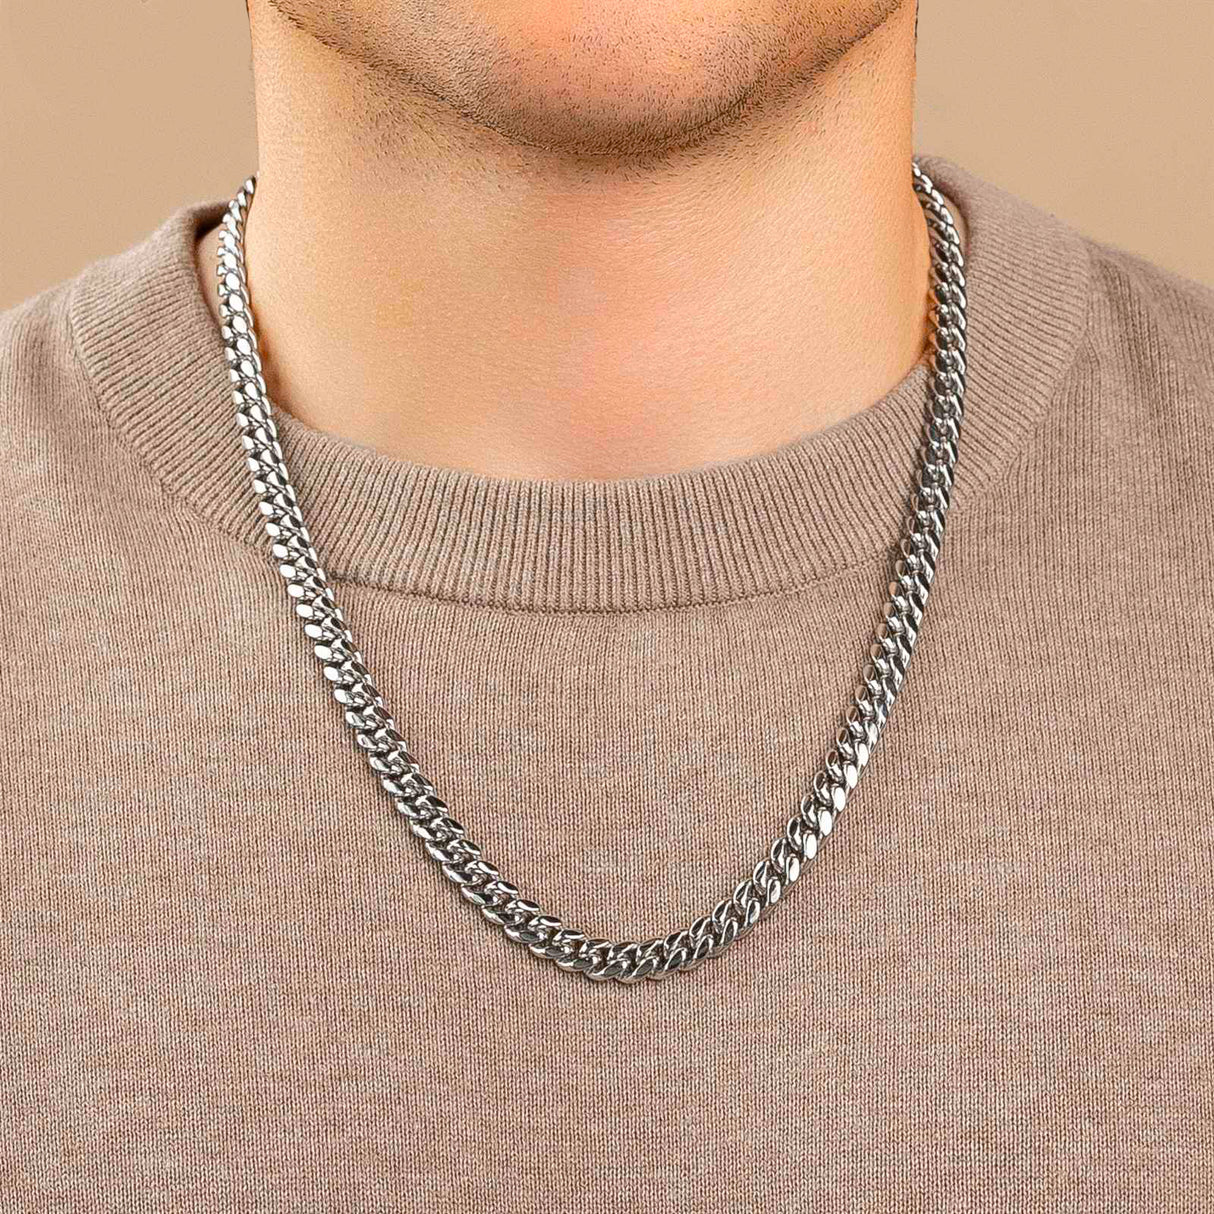 Cuban Link Chain White Gold (8mm) 22